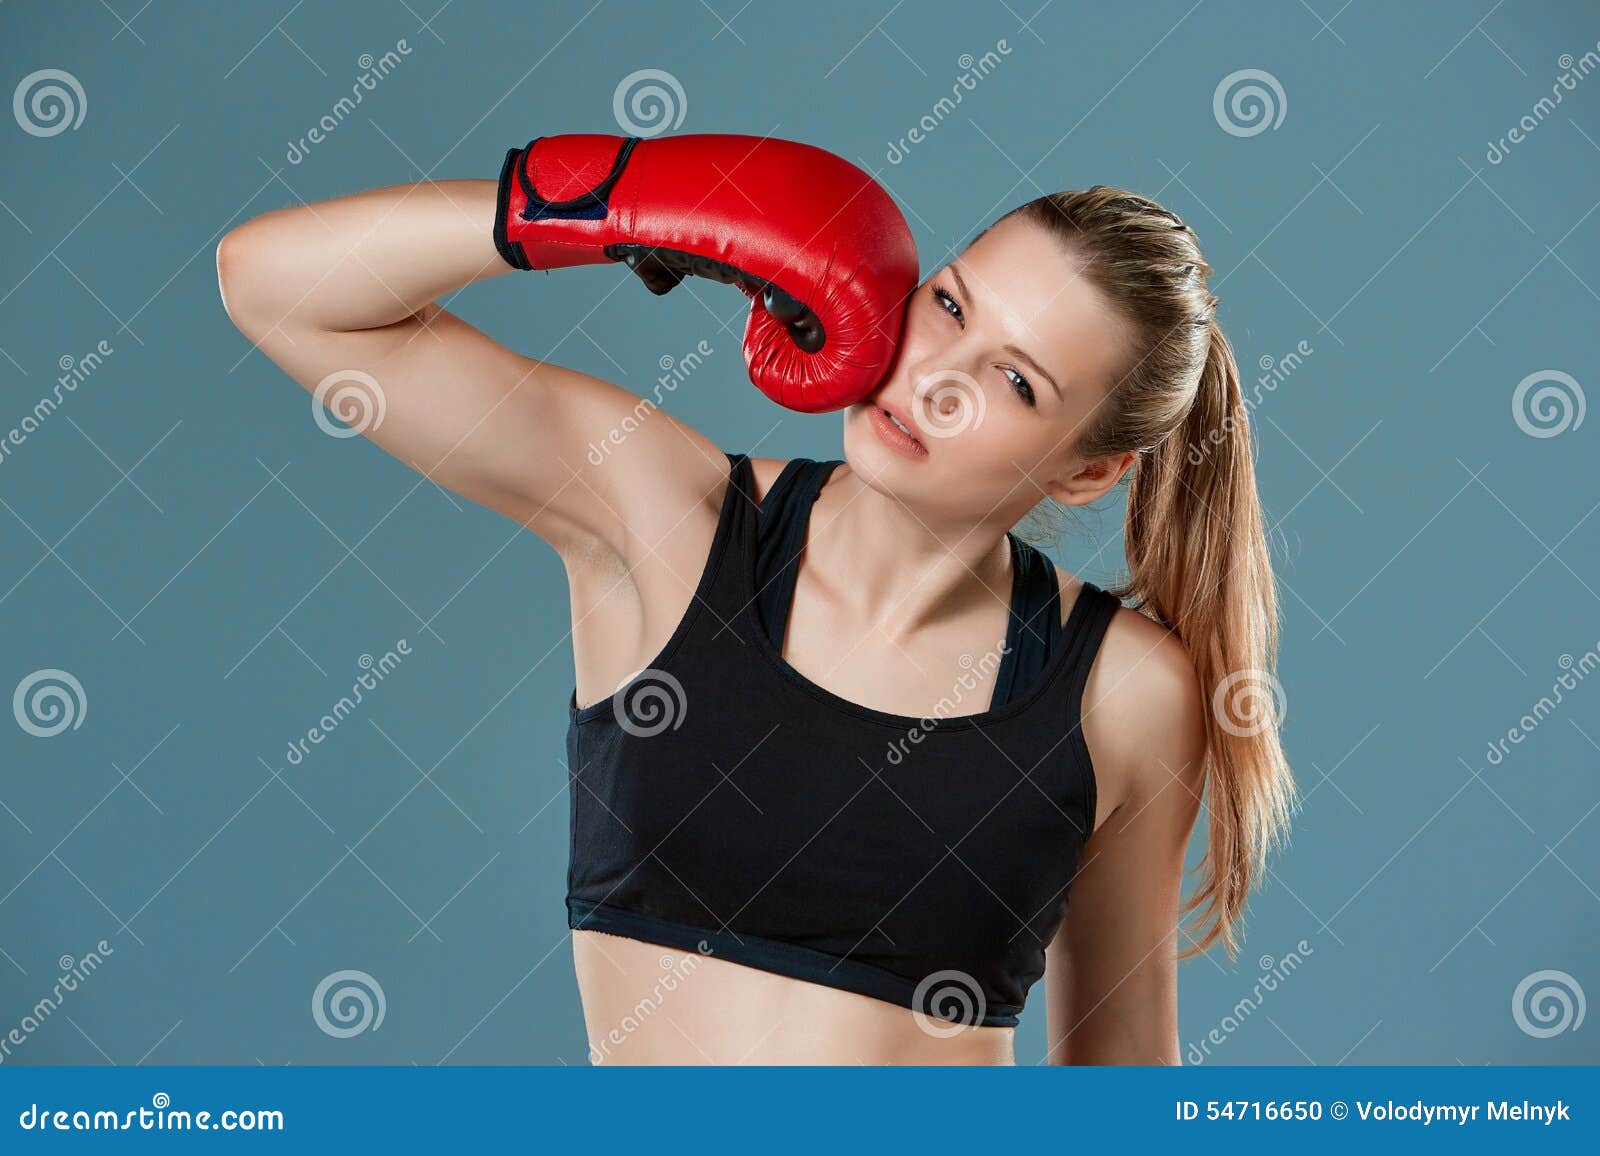 https://thumbs.dreamstime.com/z/young-girl-boxer-punching-herself-as-self-punishment-blue-background-54716650.jpg